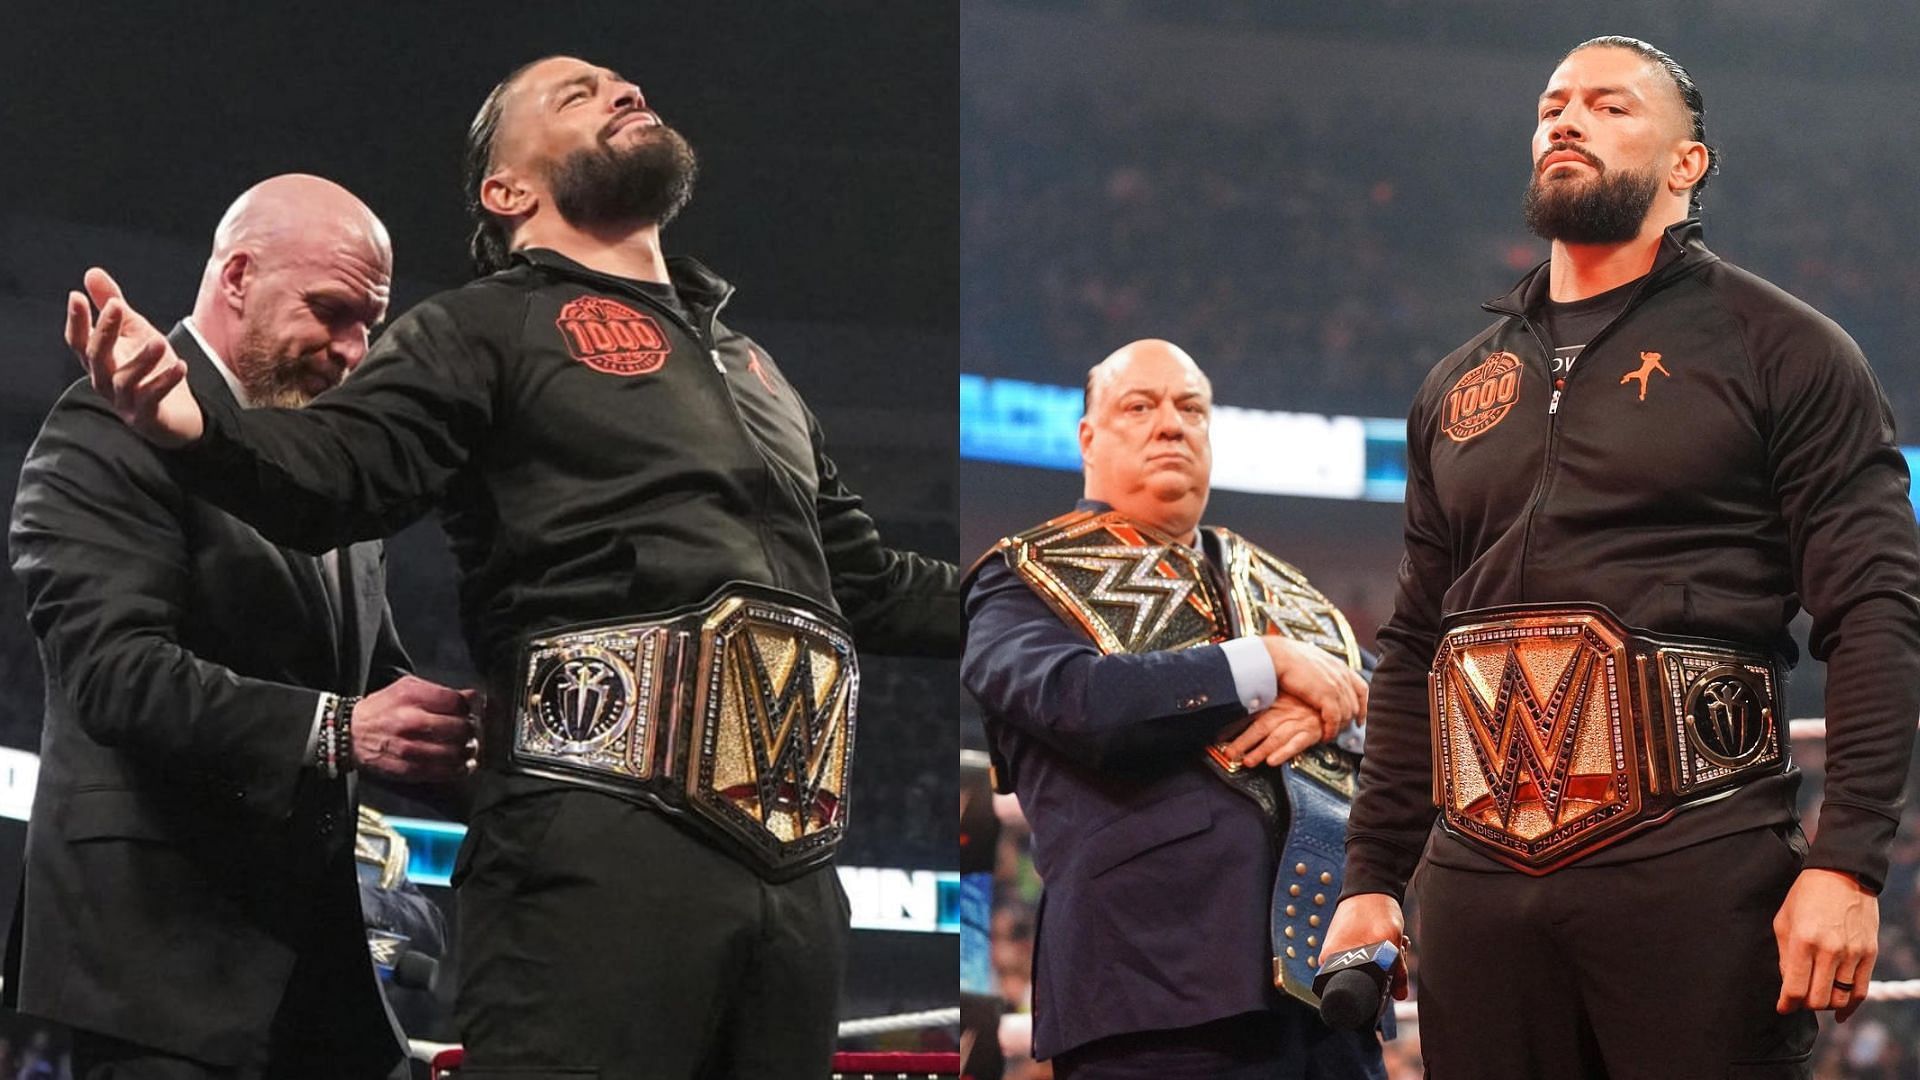 Roman Reigns is the reigning Undisputed WWE Universal Champion